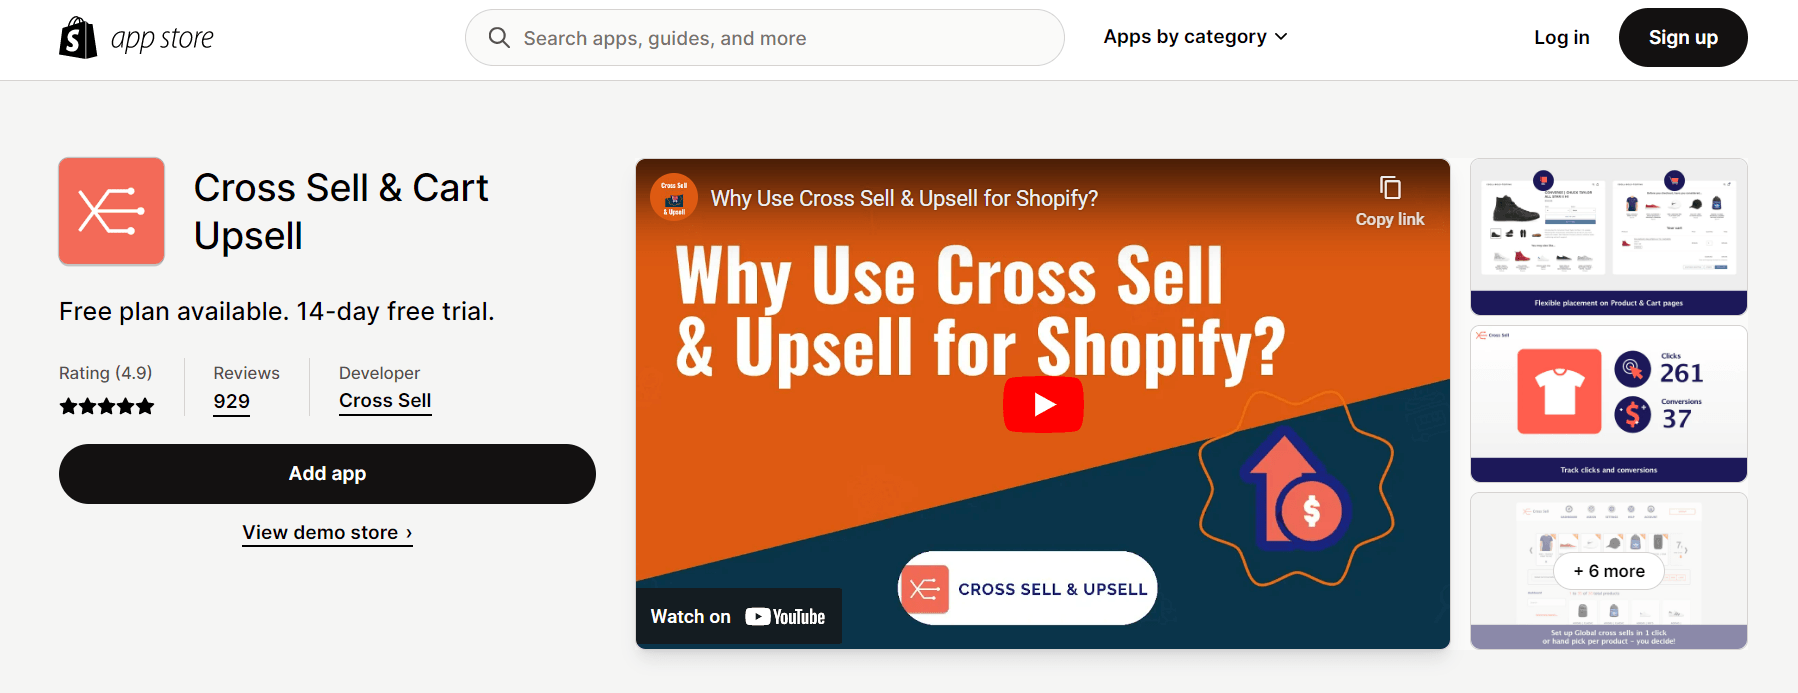 cross-sell apps for Shopify